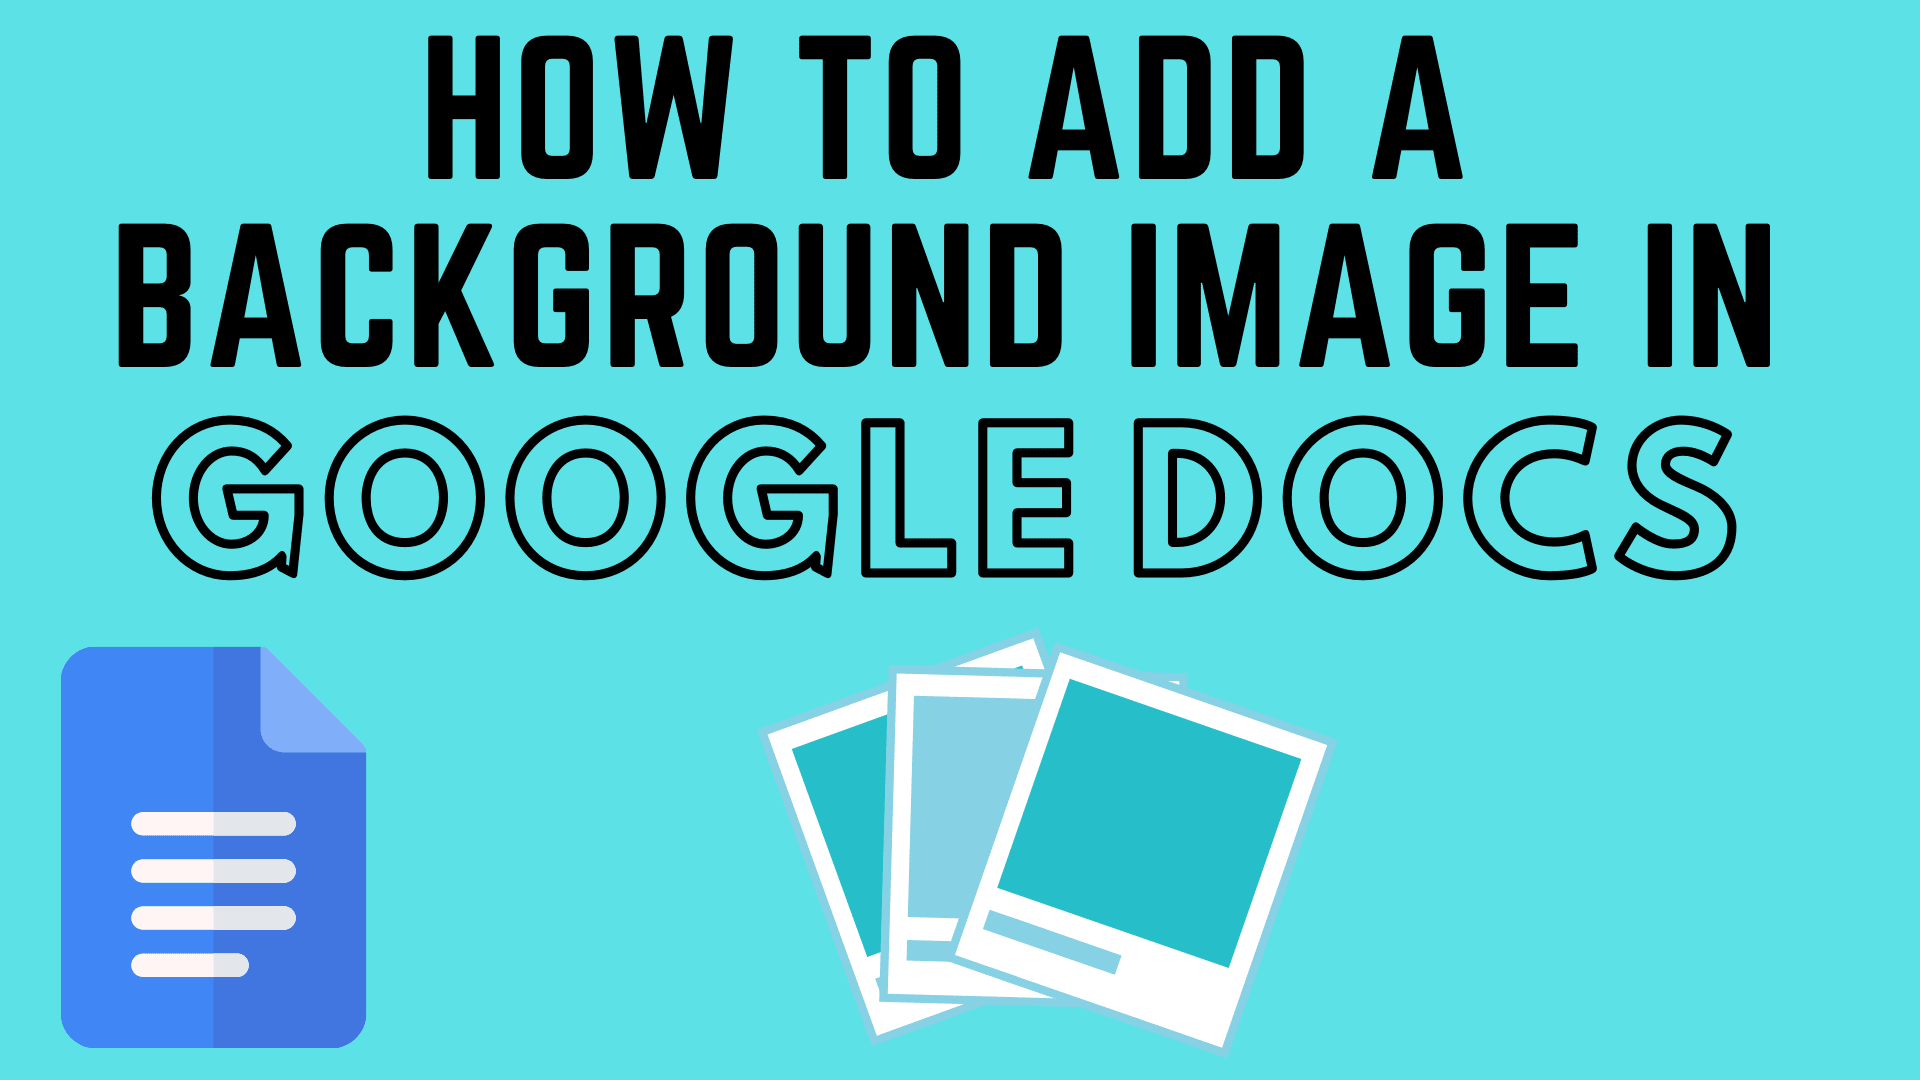 How to Add a Background Image in Google Docs 